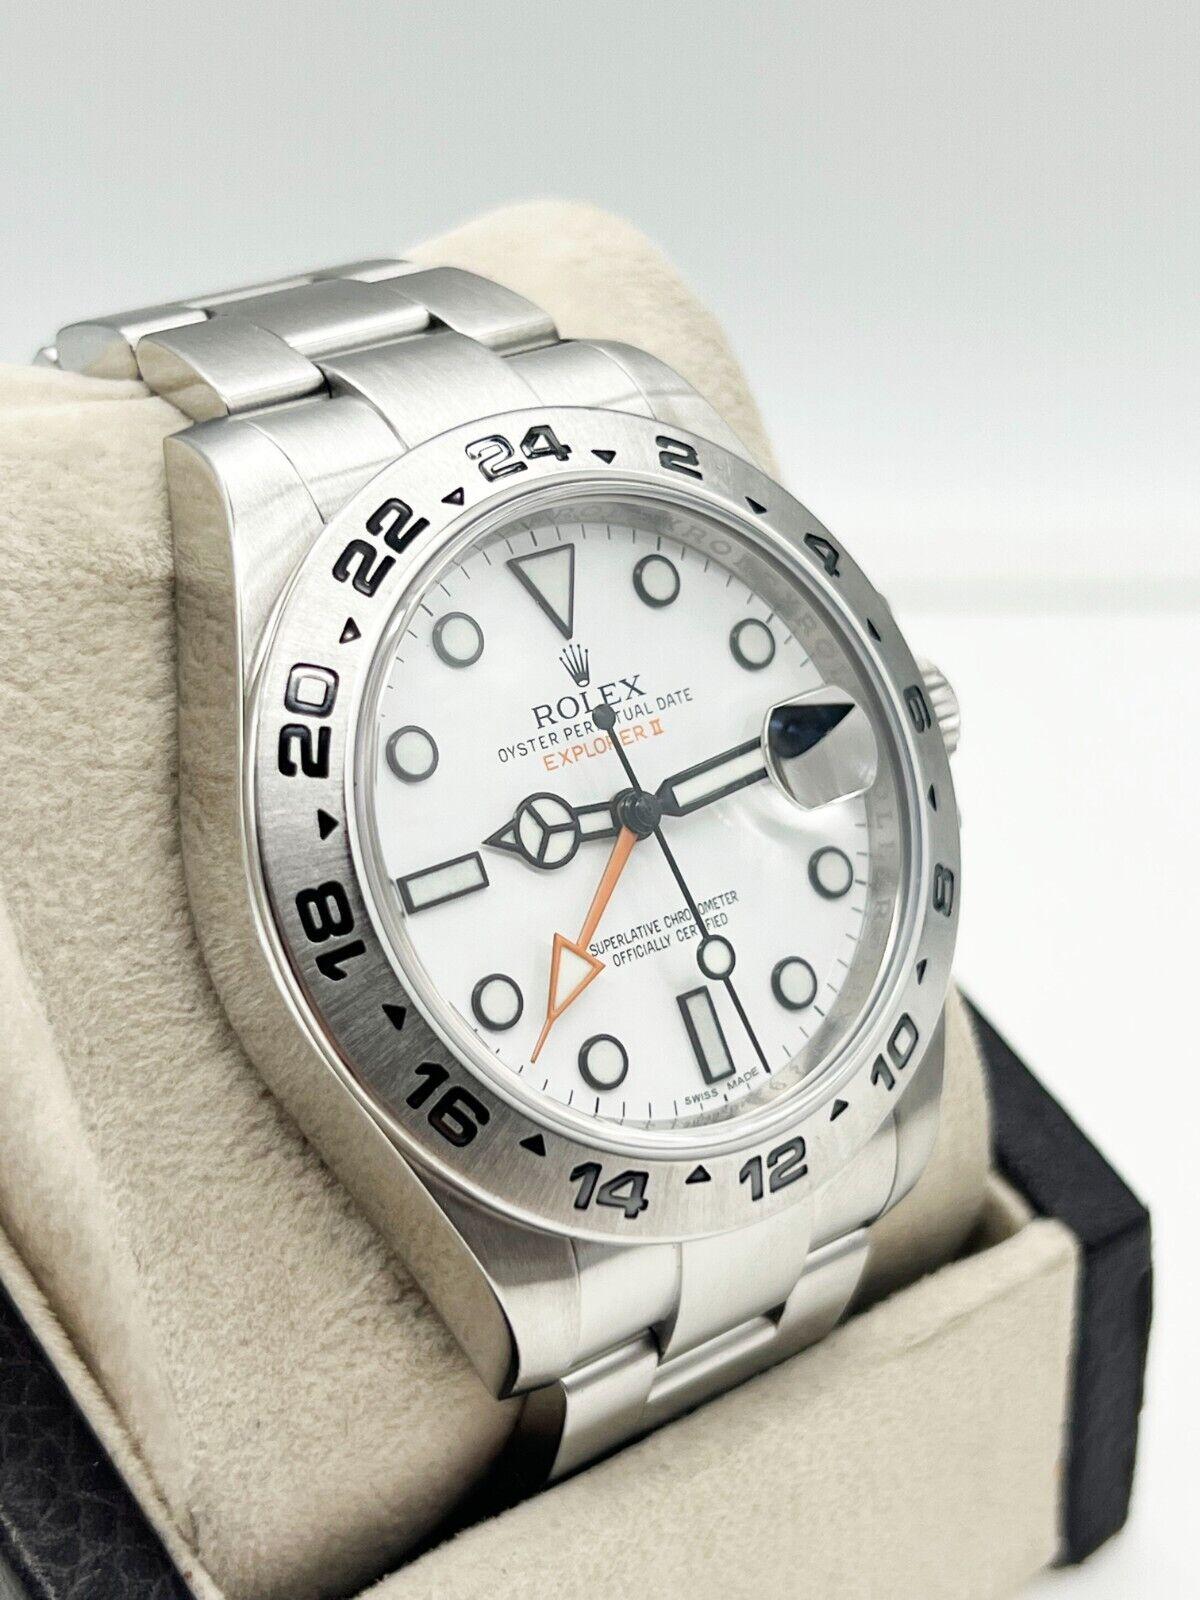 Style Number: 216570

Serial: M2983***

Year: 2010 - Now

Model: Explorer II 

Case Material: Stainless Steel  

Band: Stainless Steel 

Bezel: Stainless Steel 

Dial: White  

Face: Sapphire Crystal 

Case Size: 42mm 

Includes: 

-Elegant Watch